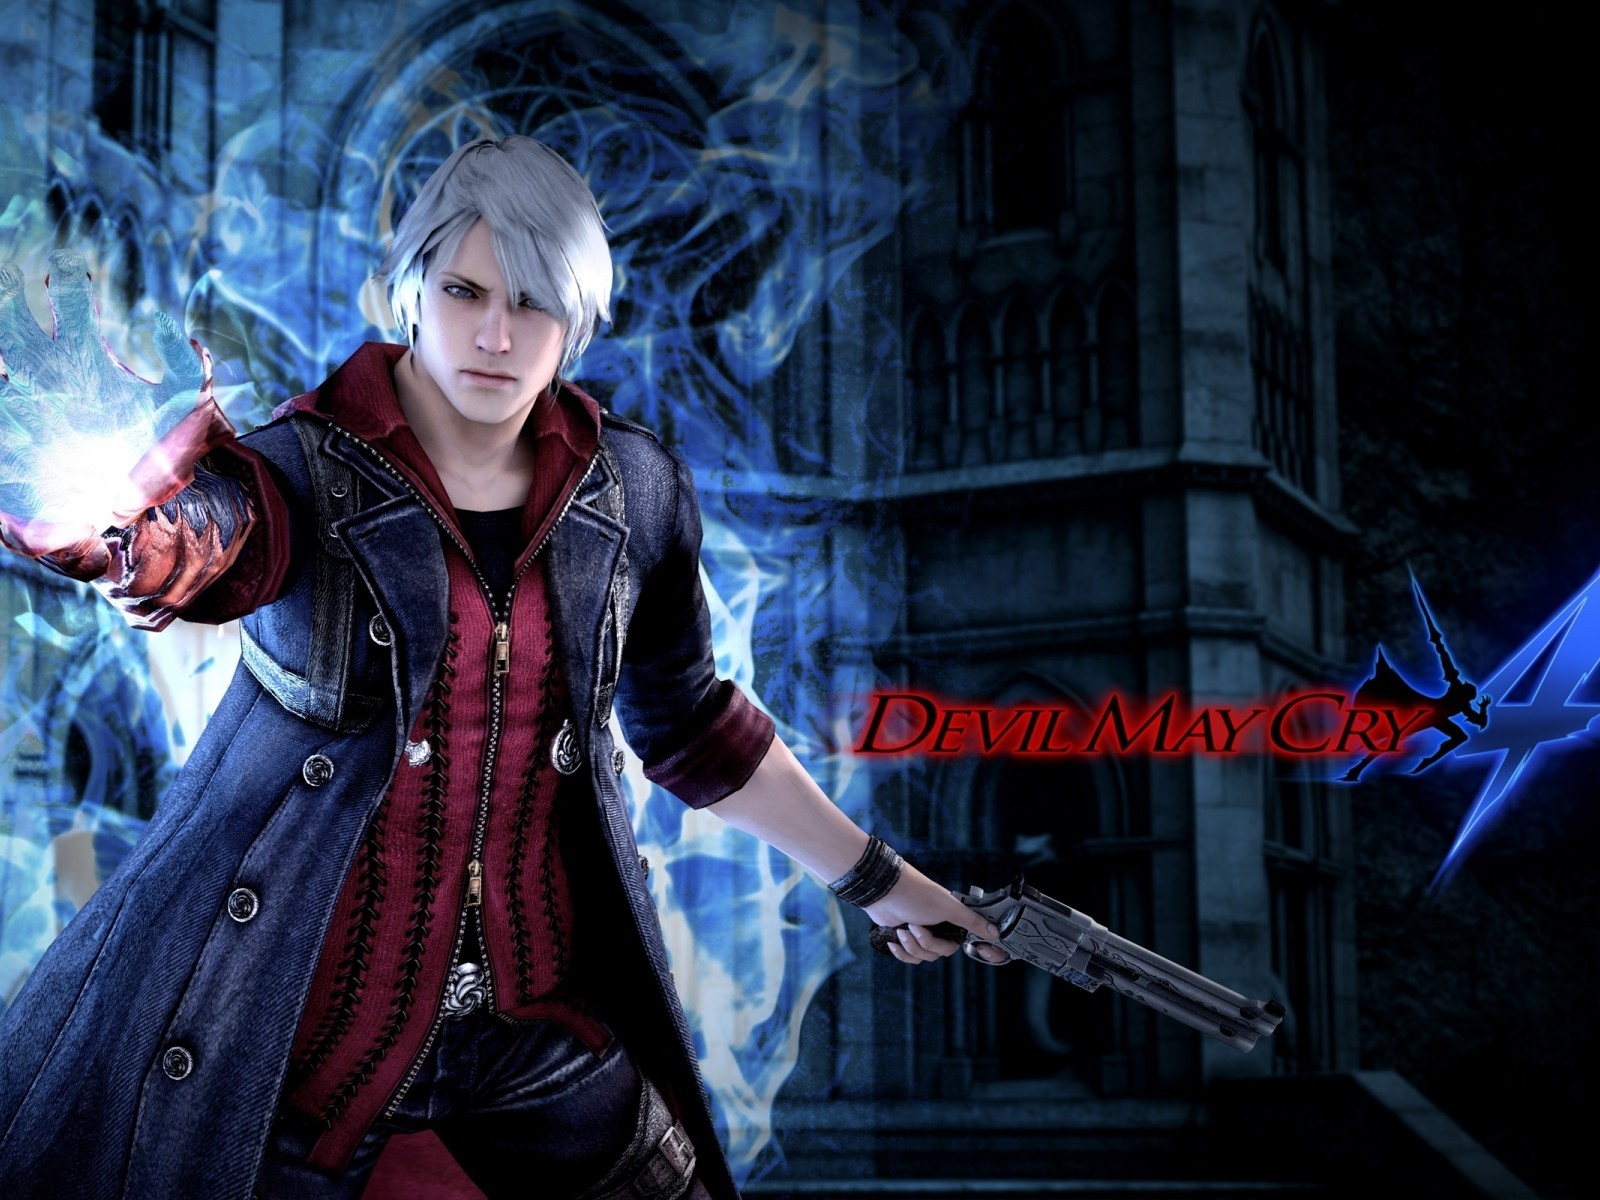 Devil May Cry 4 Poster for 1600 x 1200 resolution